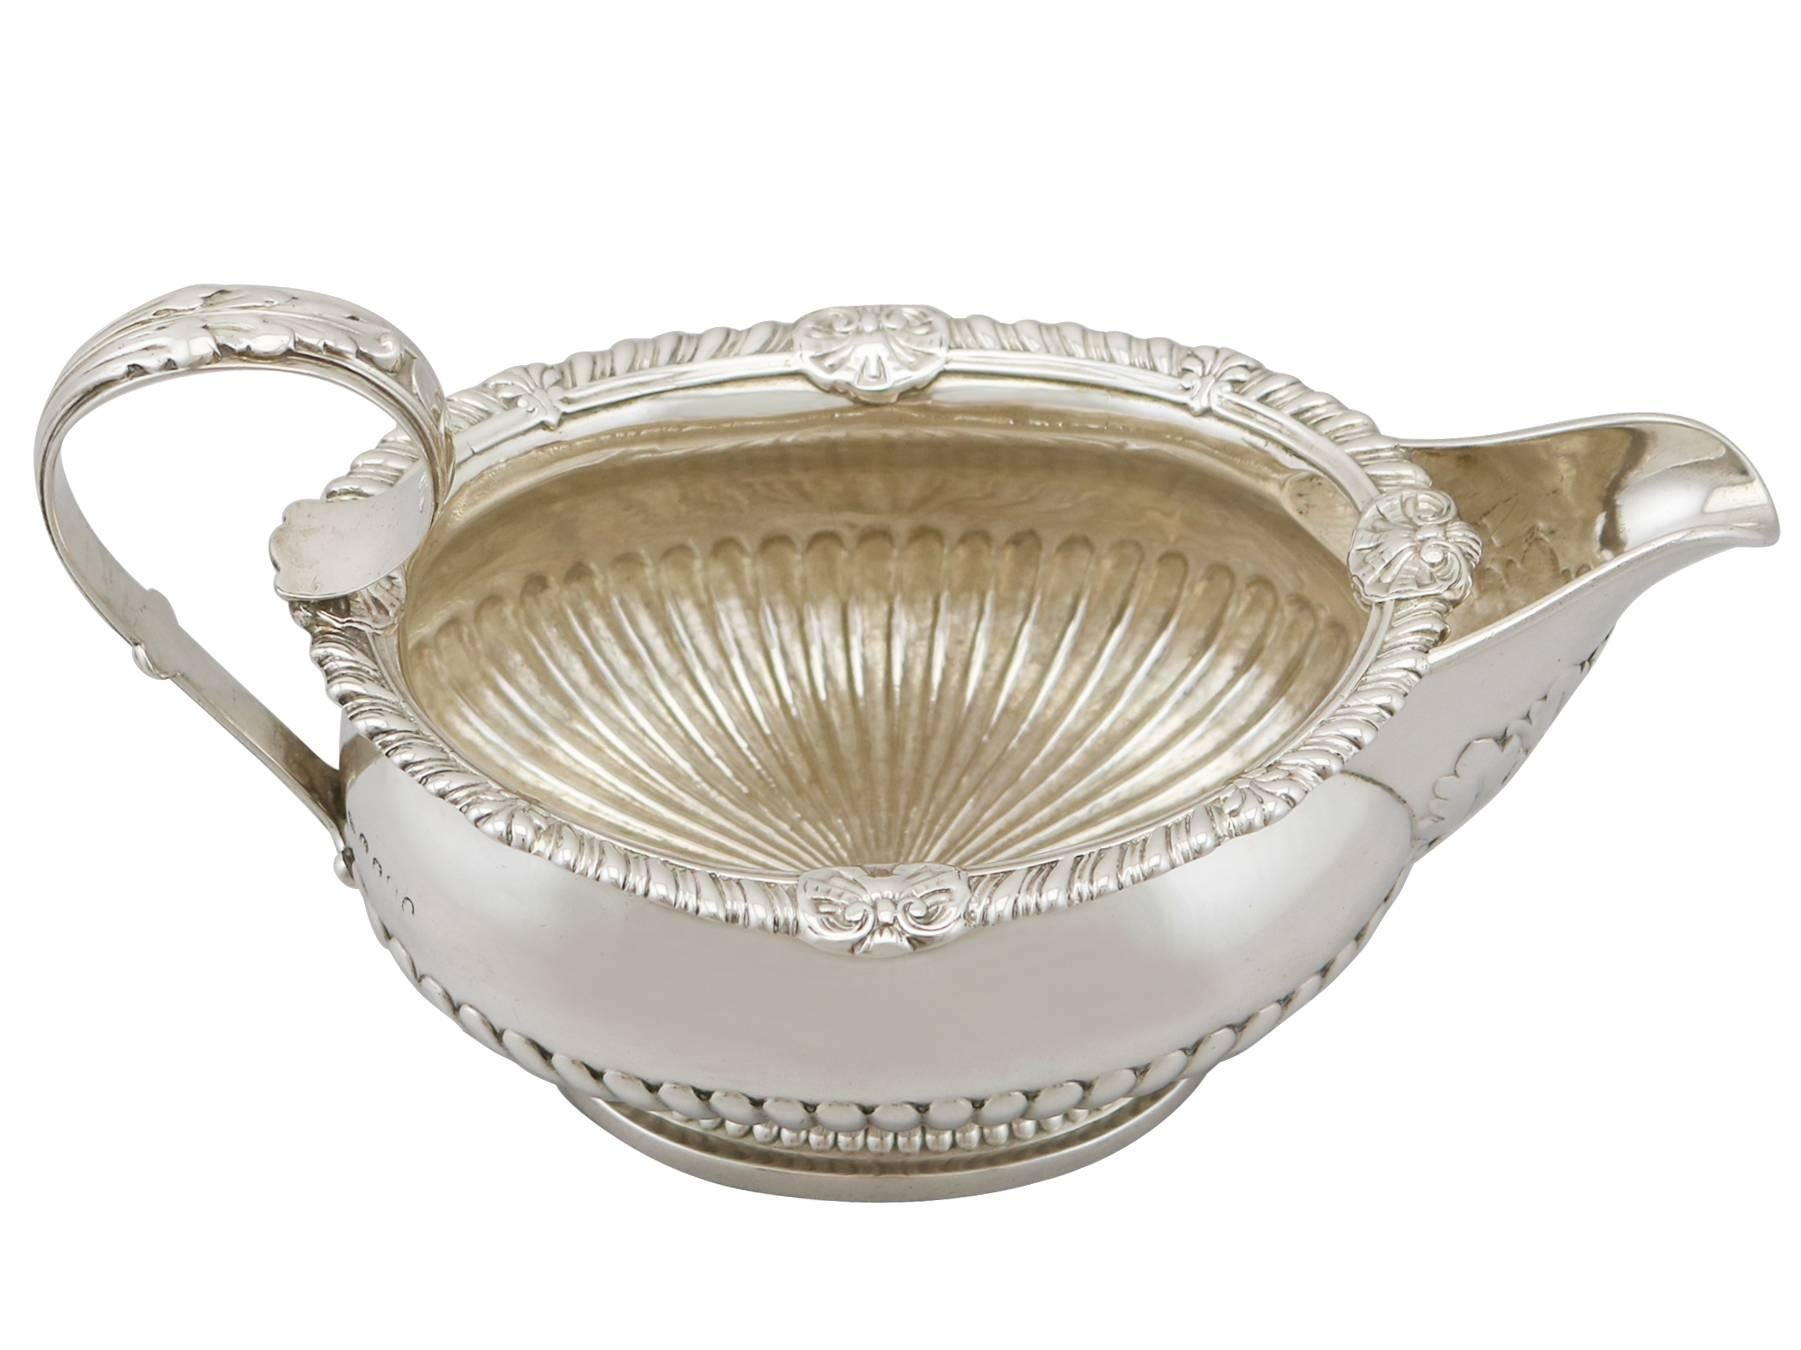 An exceptional, fine and impressive antique George III English sterling silver cream jug made by Paul Storr; an addition to our Georgian silver teaware collection.

This exceptional antique George III sterling silver cream jug has an oval rounded